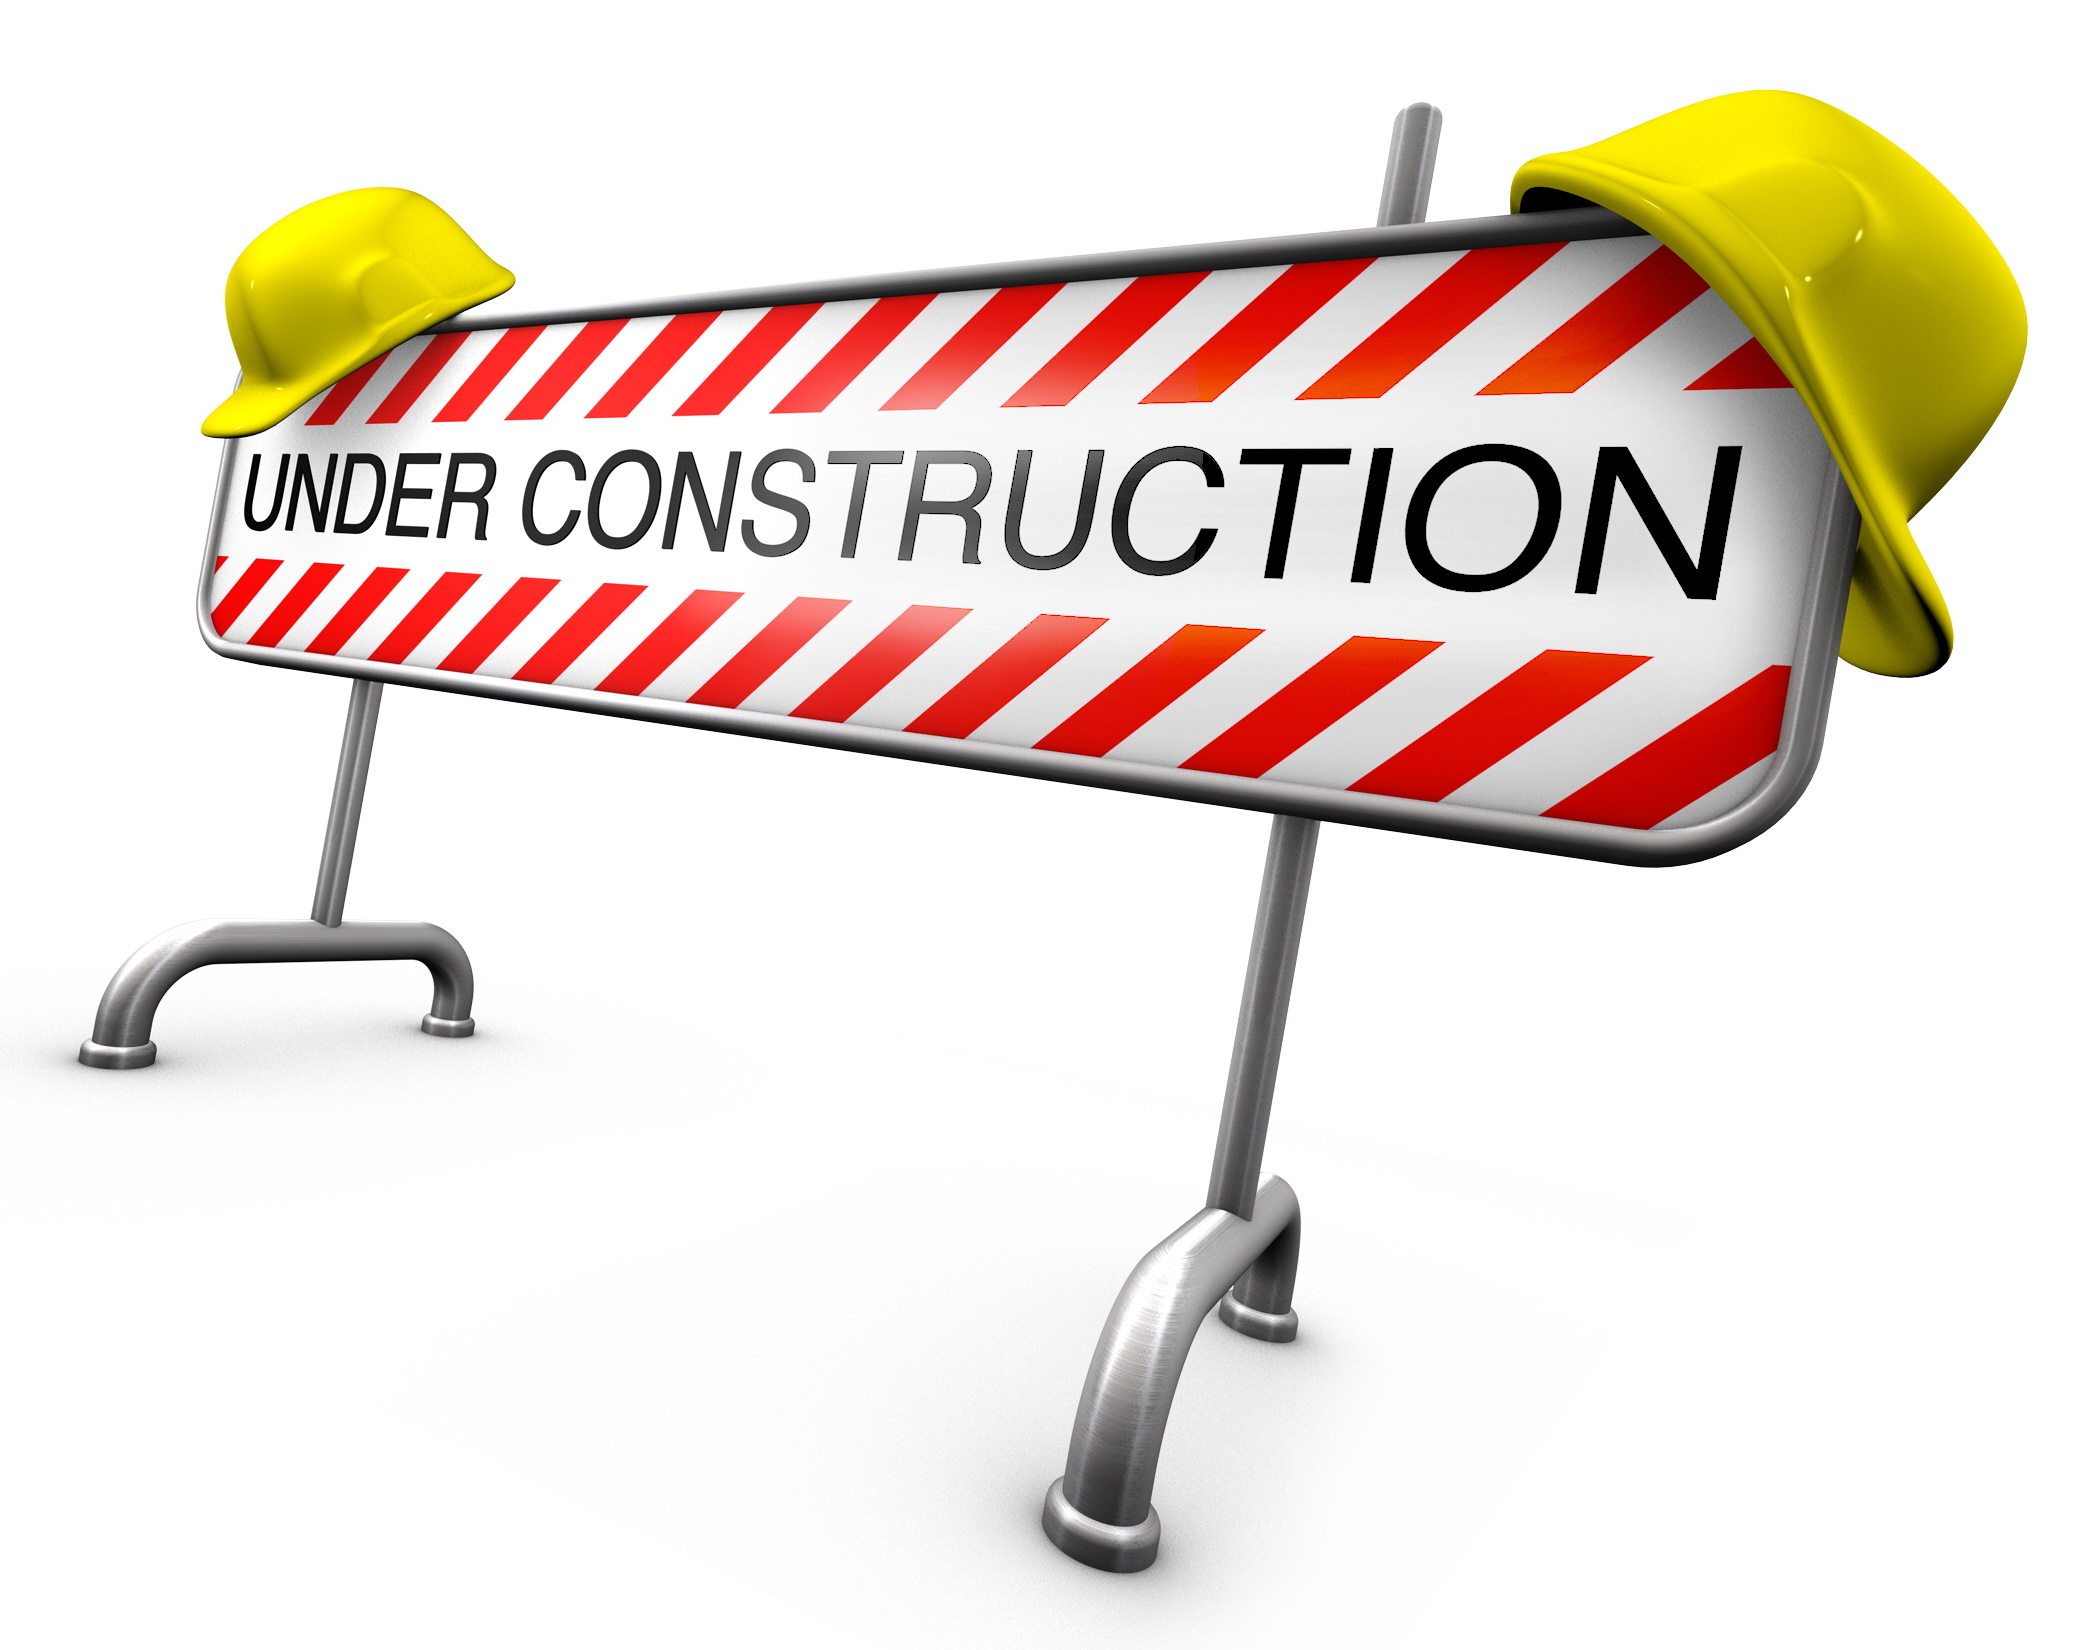 free clipart images under construction - photo #34